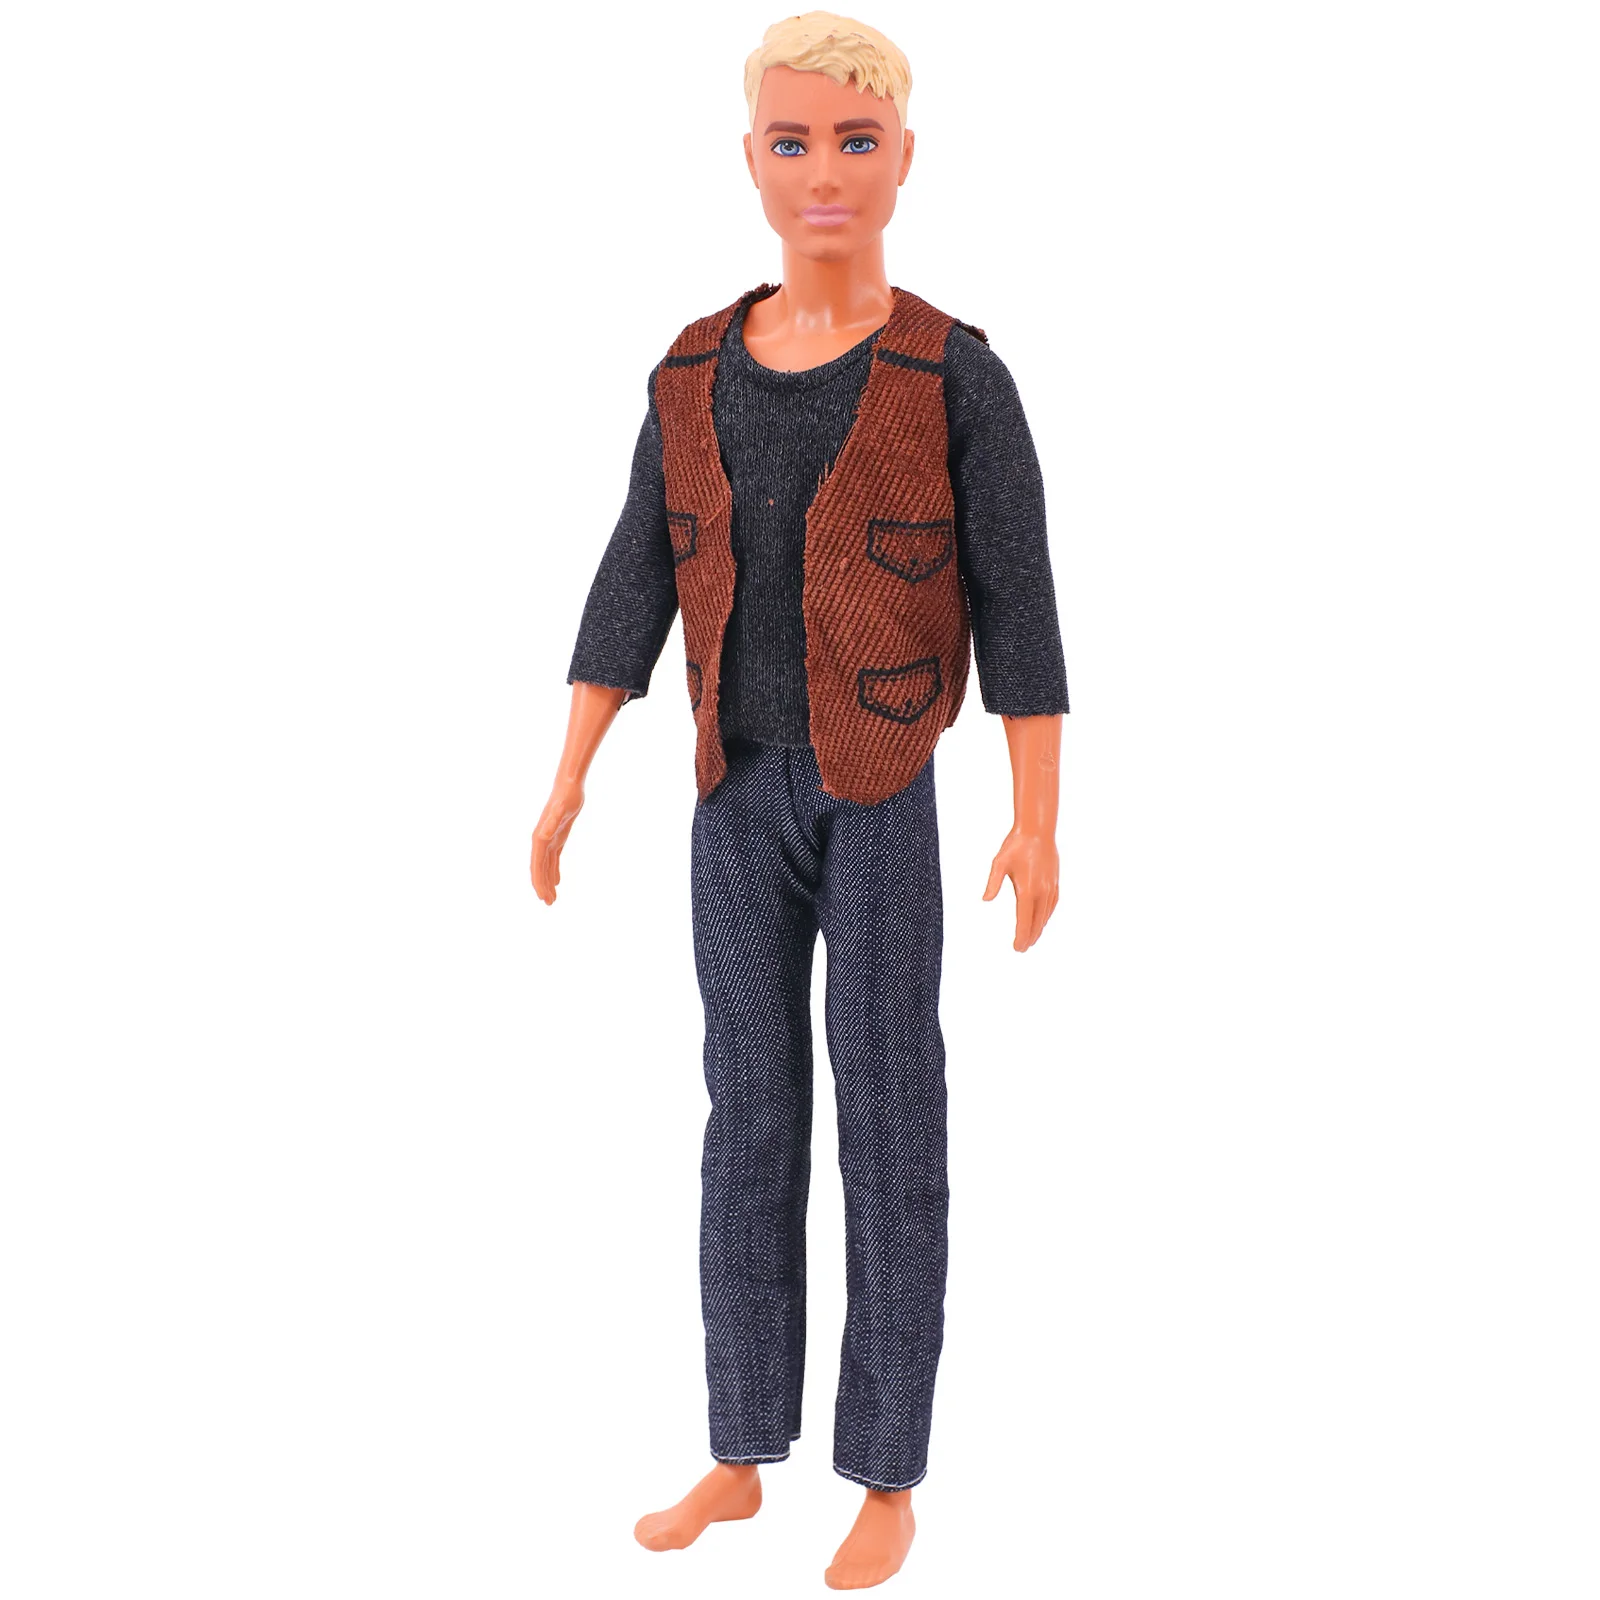 30cm Ken Doll Clothes Fashion Suit Top+pants Cool Outfit Ken Dolls For  Barbies Boy Children's Holiday Gift Barbies Accessories - AliExpress